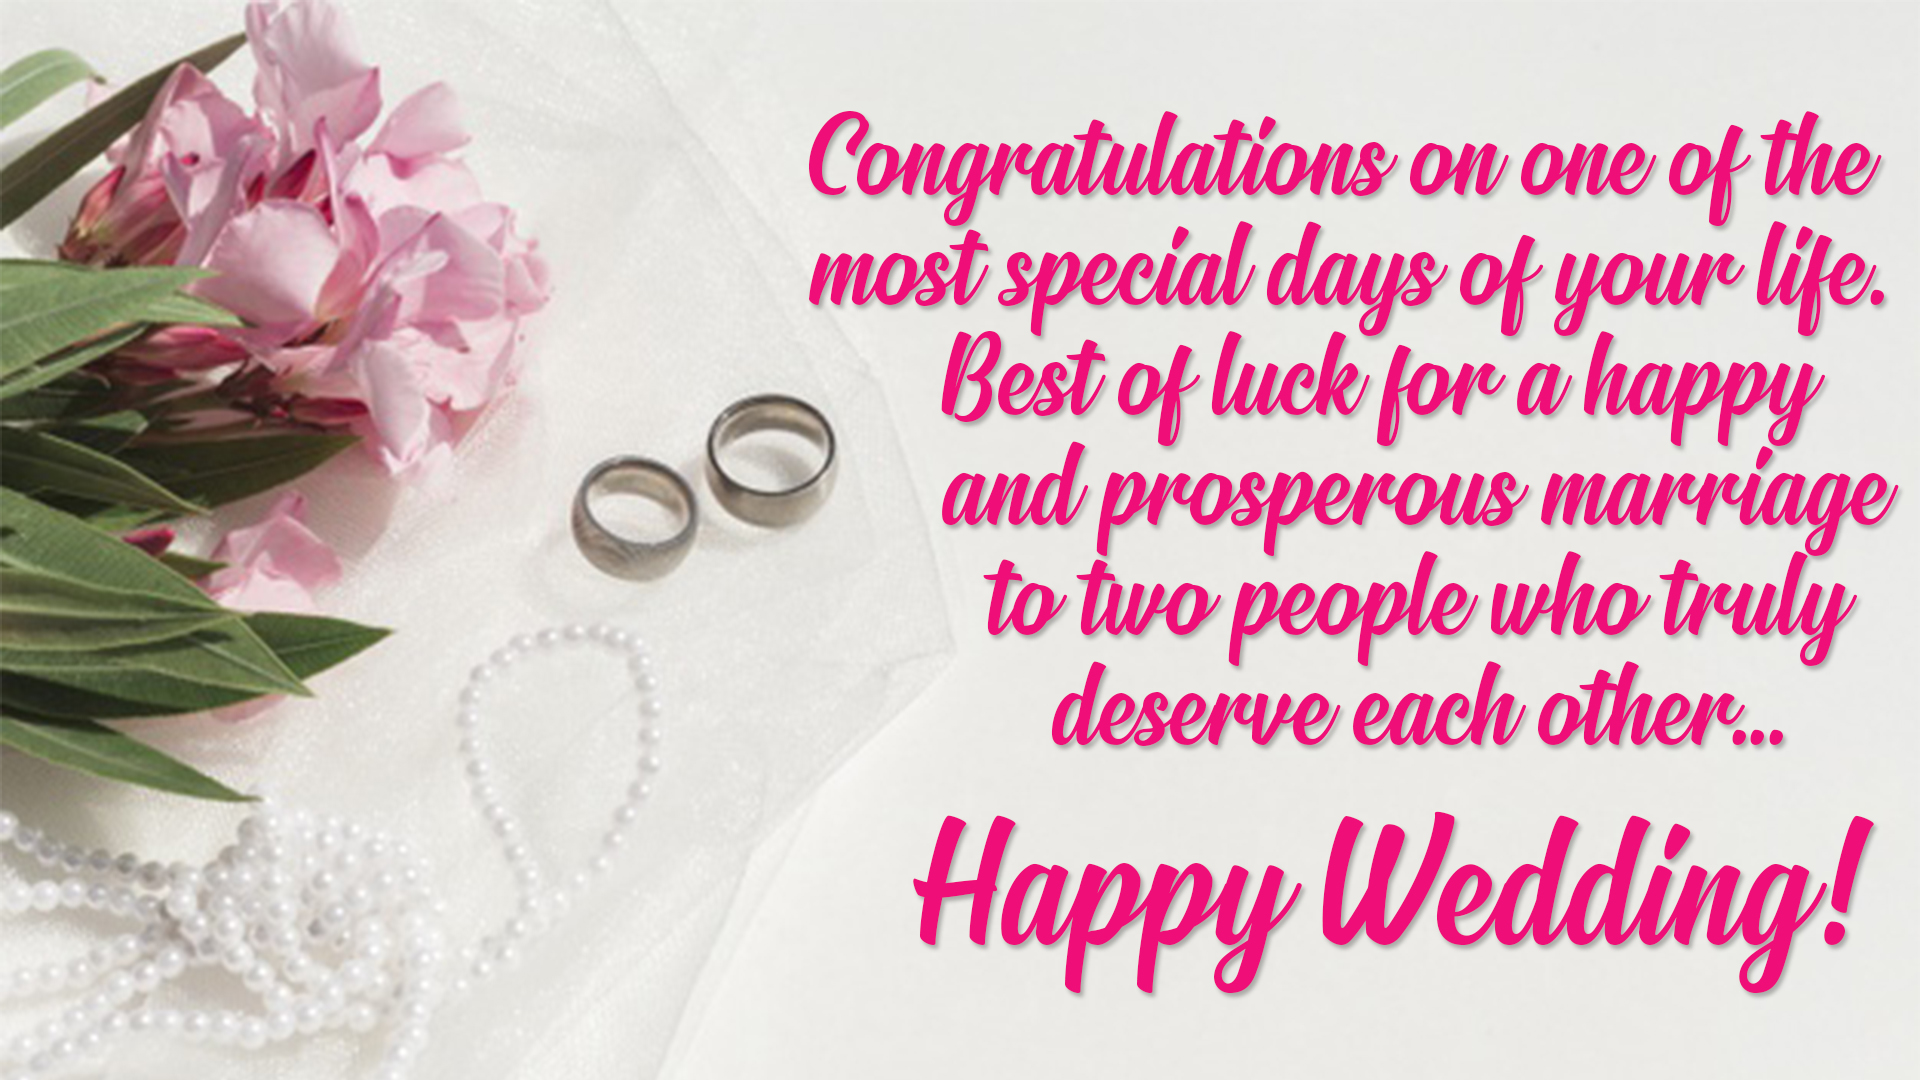 Happy Wedding Wishes Messages For Everyone Marriage Greetings